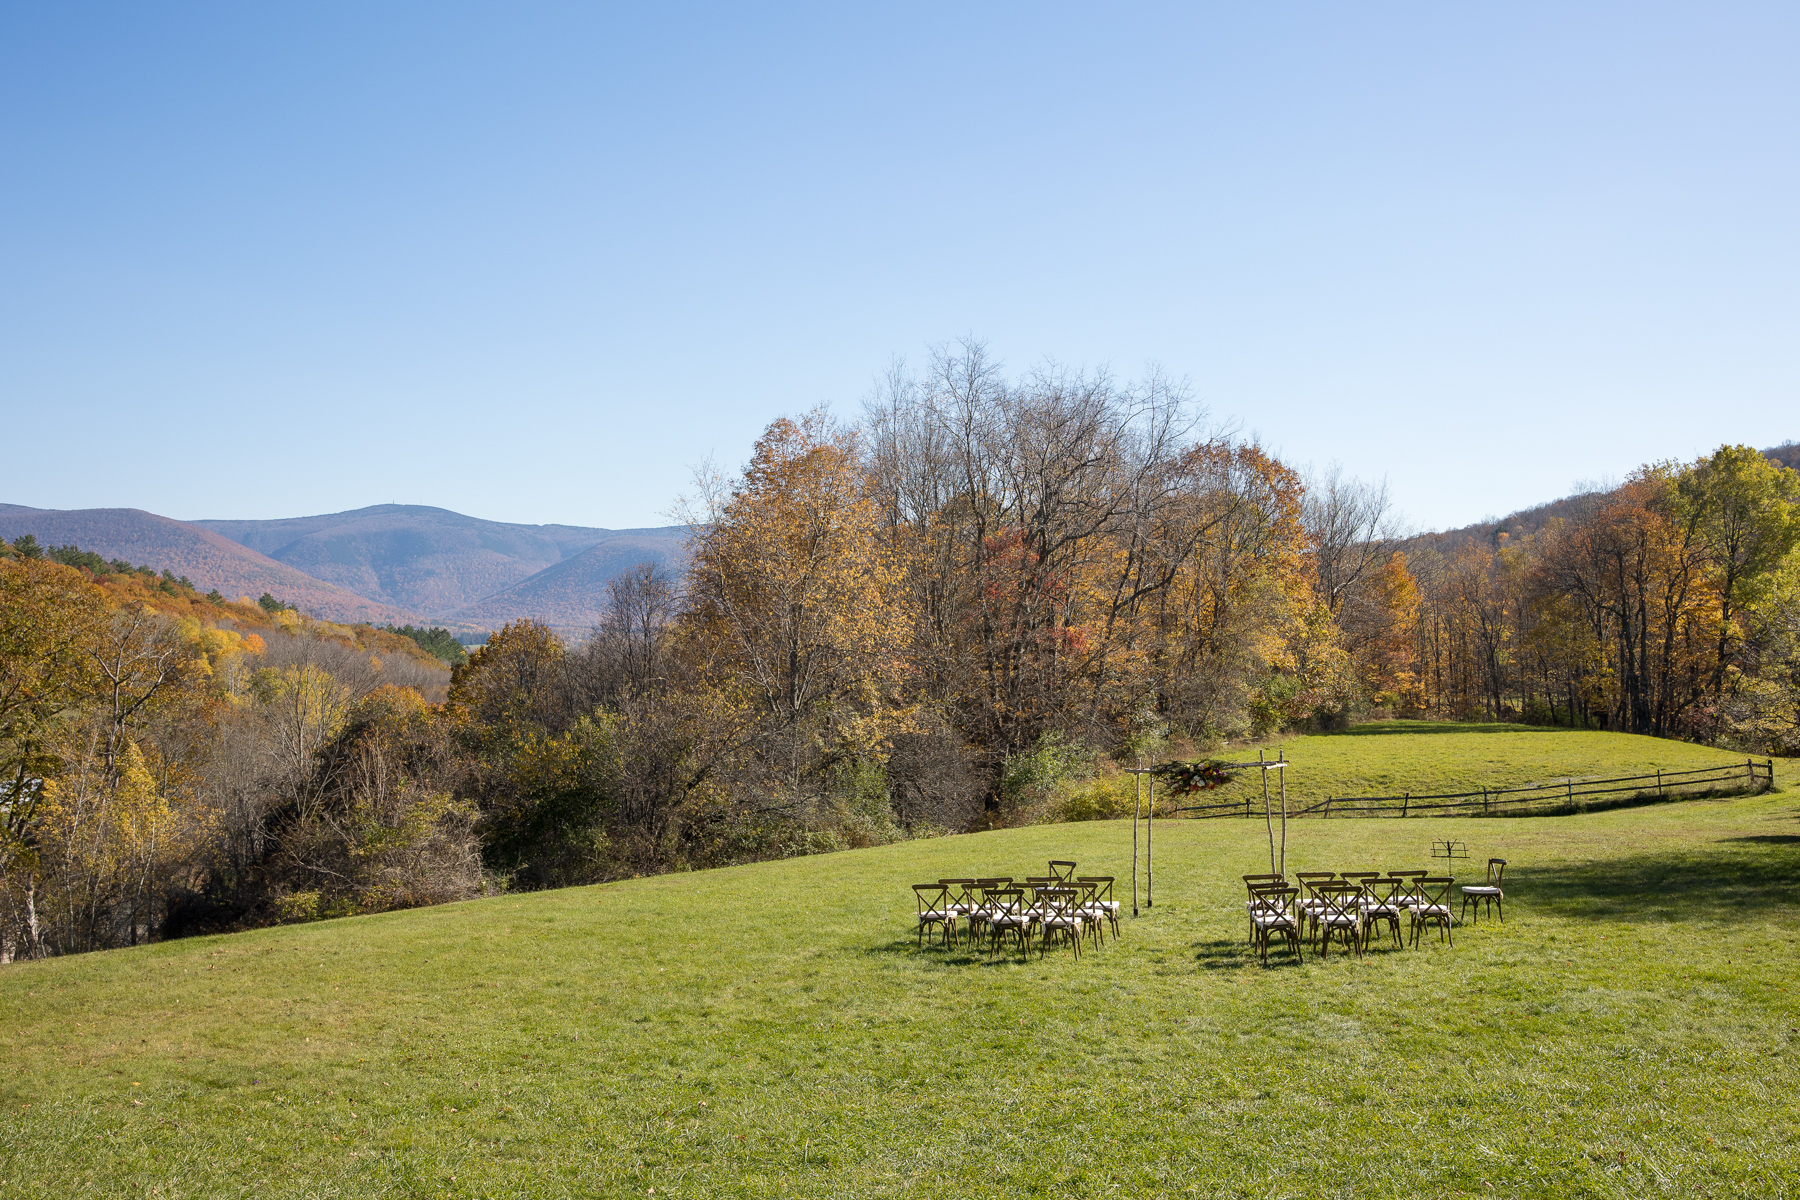 A panoramic view from the Brookman estate deck with Greylock Mountain in the background